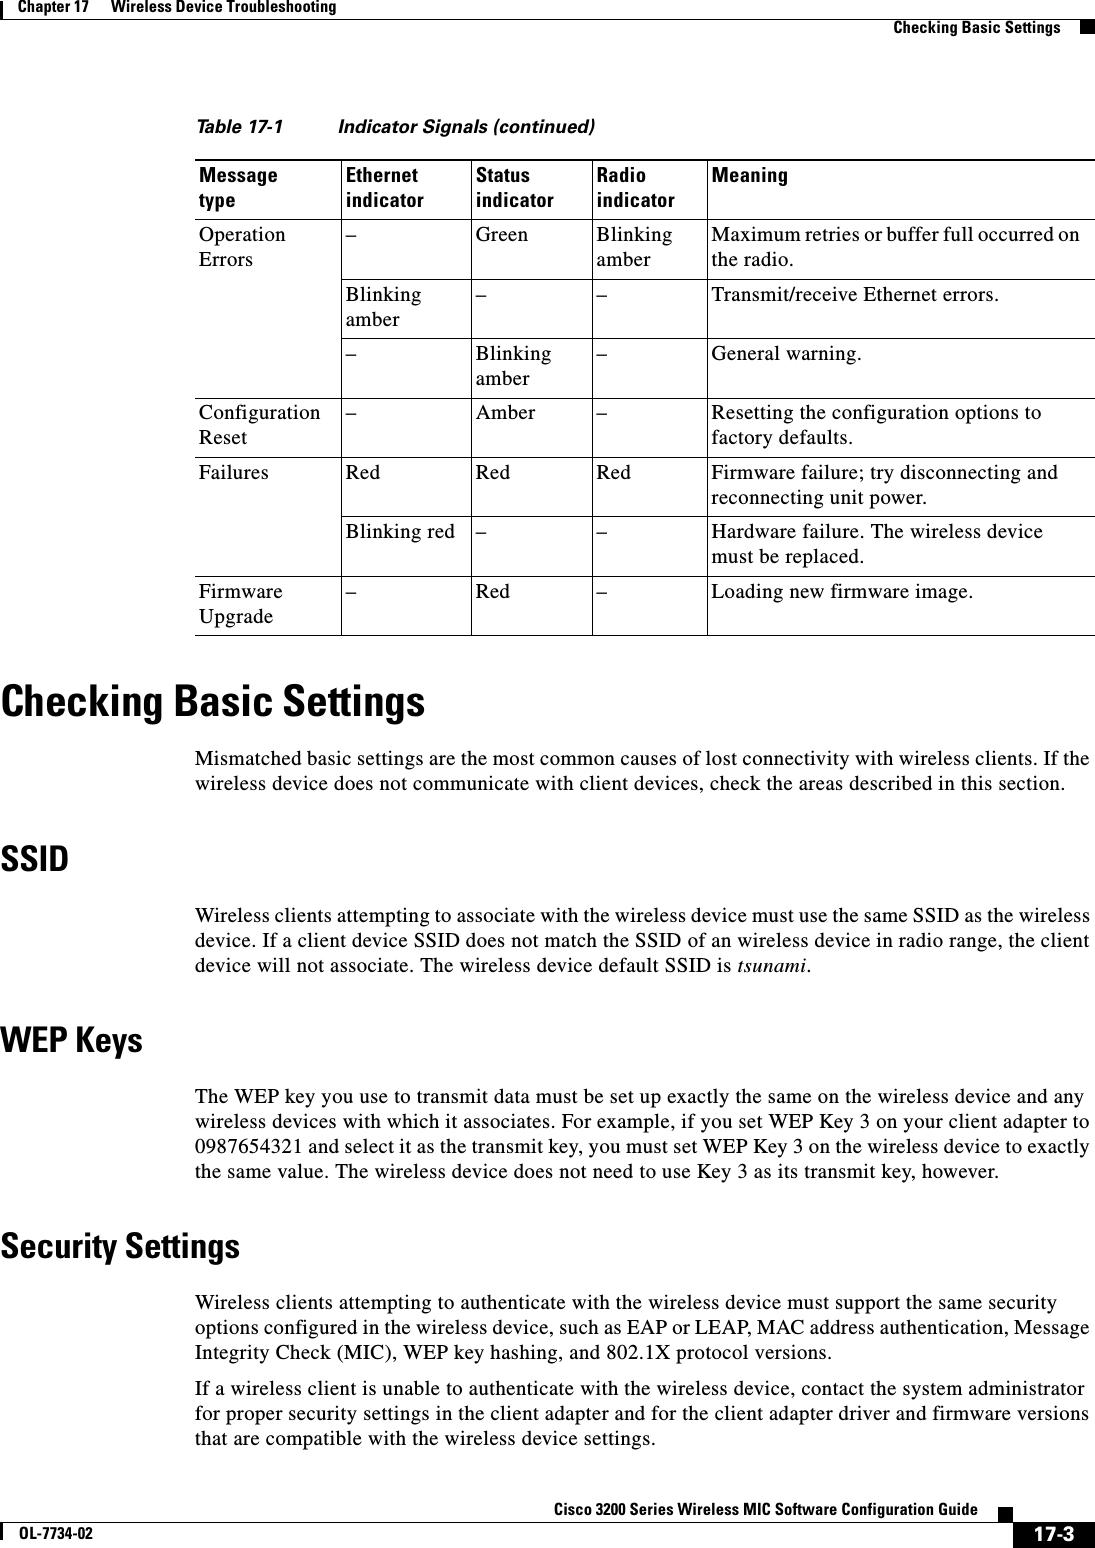 17-3Cisco 3200 Series Wireless MIC Software Configuration GuideOL-7734-02Chapter 17      Wireless Device TroubleshootingChecking Basic SettingsChecking Basic SettingsMismatched basic settings are the most common causes of lost connectivity with wireless clients. If the wireless device does not communicate with client devices, check the areas described in this section.SSIDWireless clients attempting to associate with the wireless device must use the same SSID as the wireless device. If a client device SSID does not match the SSID of an wireless device in radio range, the client device will not associate. The wireless device default SSID is tsunami.WEP KeysThe WEP key you use to transmit data must be set up exactly the same on the wireless device and any wireless devices with which it associates. For example, if you set WEP Key 3 on your client adapter to 0987654321 and select it as the transmit key, you must set WEP Key 3 on the wireless device to exactly the same value. The wireless device does not need to use Key 3 as its transmit key, however.Security SettingsWireless clients attempting to authenticate with the wireless device must support the same security options configured in the wireless device, such as EAP or LEAP, MAC address authentication, Message Integrity Check (MIC), WEP key hashing, and 802.1X protocol versions.If a wireless client is unable to authenticate with the wireless device, contact the system administrator for proper security settings in the client adapter and for the client adapter driver and firmware versions that are compatible with the wireless device settings.Operation Errors–GreenBlinking amberMaximum retries or buffer full occurred on the radio.Blinking amber– – Transmit/receive Ethernet errors. – Blinking amber– General warning.Configuration Reset– Amber – Resetting the configuration options to factory defaults.Failures Red Red Red Firmware failure; try disconnecting and reconnecting unit power.Blinking red – – Hardware failure. The wireless device must be replaced.Firmware Upgrade– Red – Loading new firmware image.Table 17-1 Indicator Signals (continued)MessagetypeEthernetindicatorStatusindicatorRadioindicatorMeaning